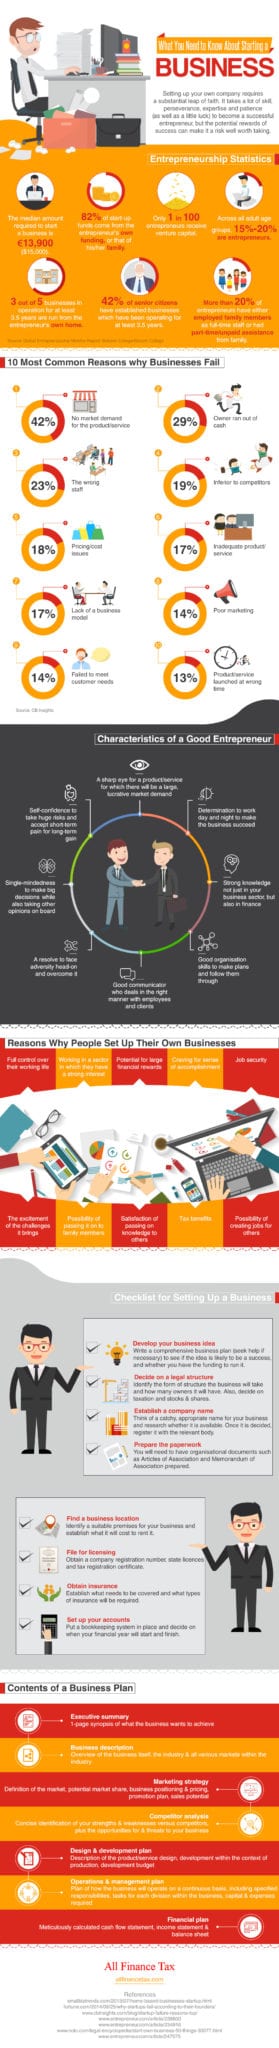 What You Need to Know About Starting a Business [Infographic]